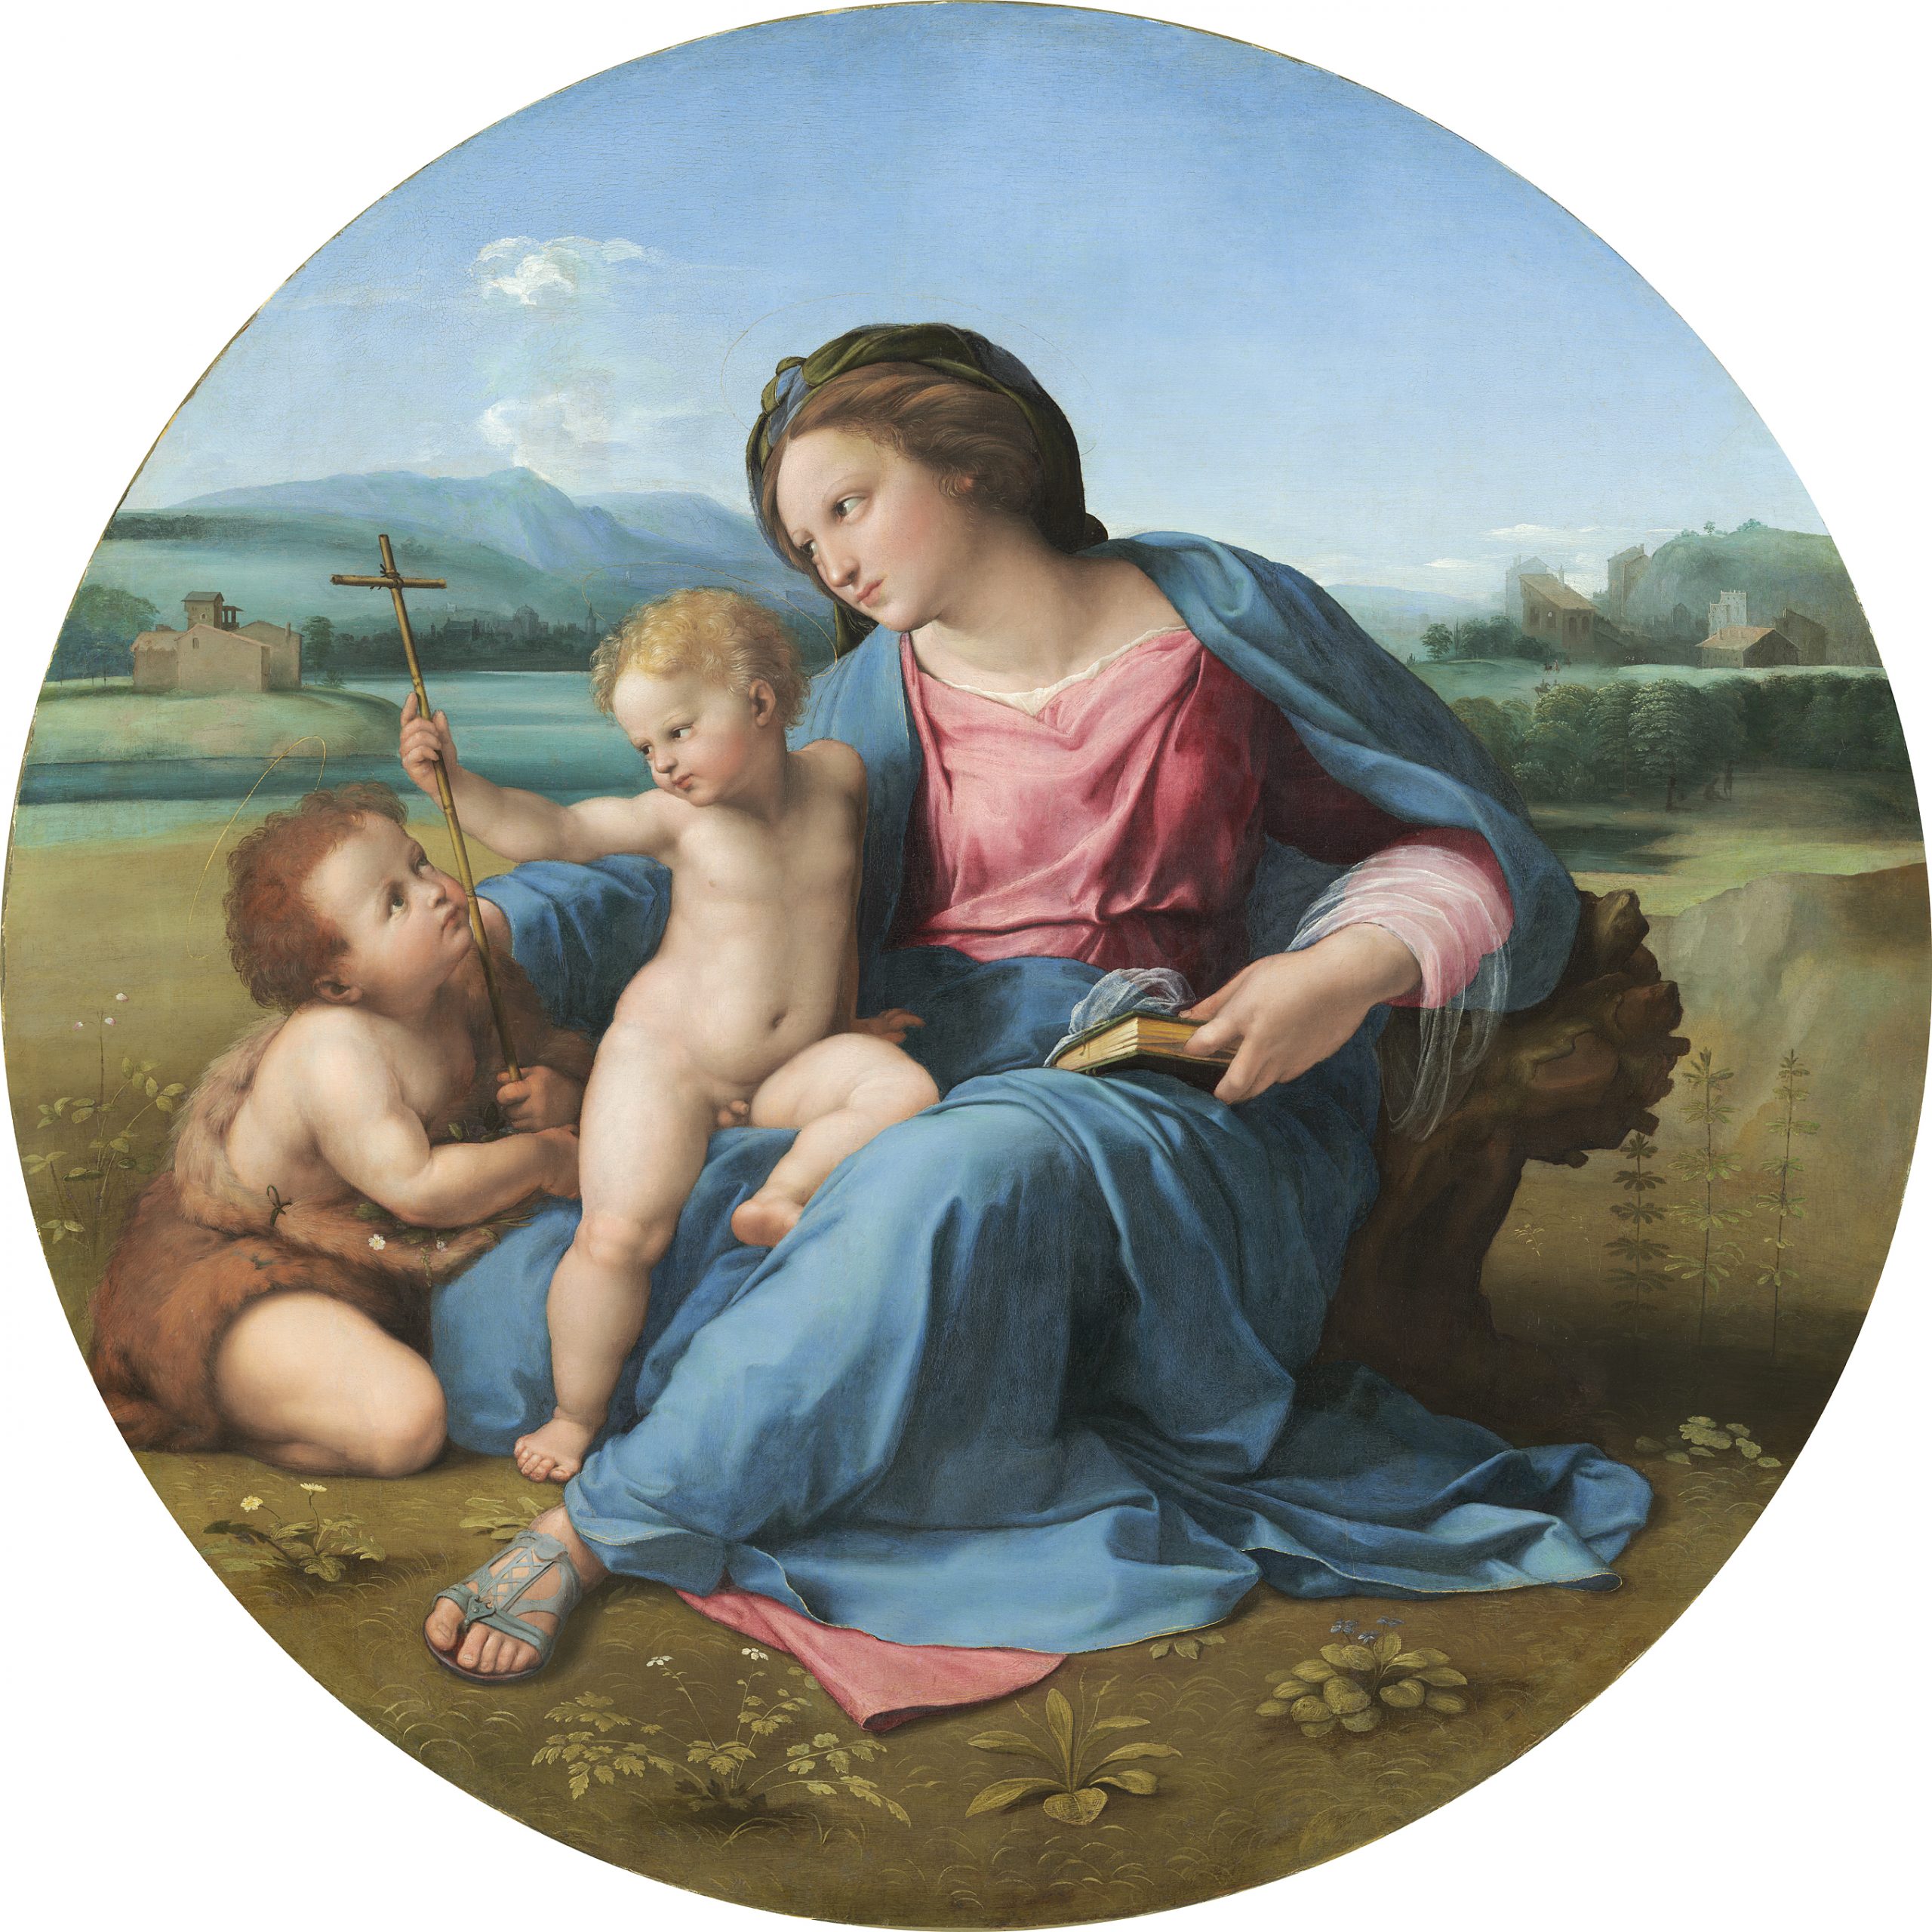 Raphael, The Virgin and Child with the Infant Saint John the Baptist (‘The Alba Madonna’), about 1509–11, Oil on wood transferred to canvas, 94.5 cm diameter, National Gallery of Art, Washington, DC, Andrew W. Mellon Collection (1937.1.24), Courtesy National Gallery of Art, Washington